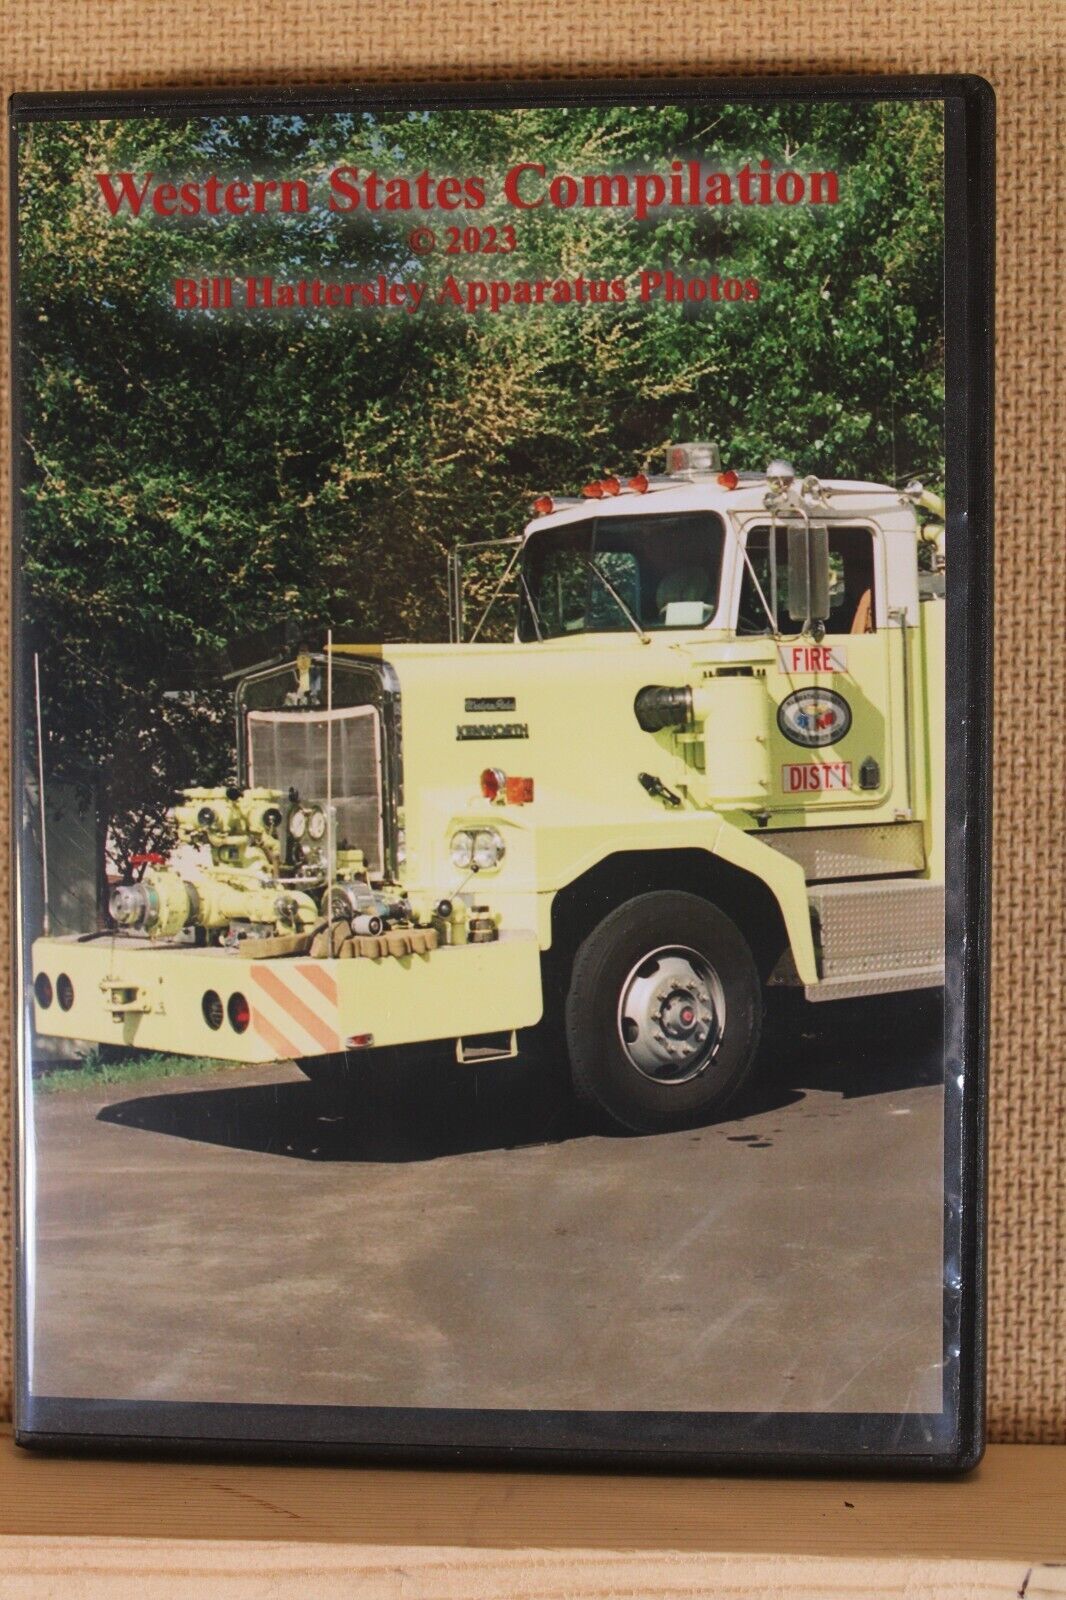 NEW-355 WESTERN-STATES Fire Apparatus Photos on CD-355 rig images